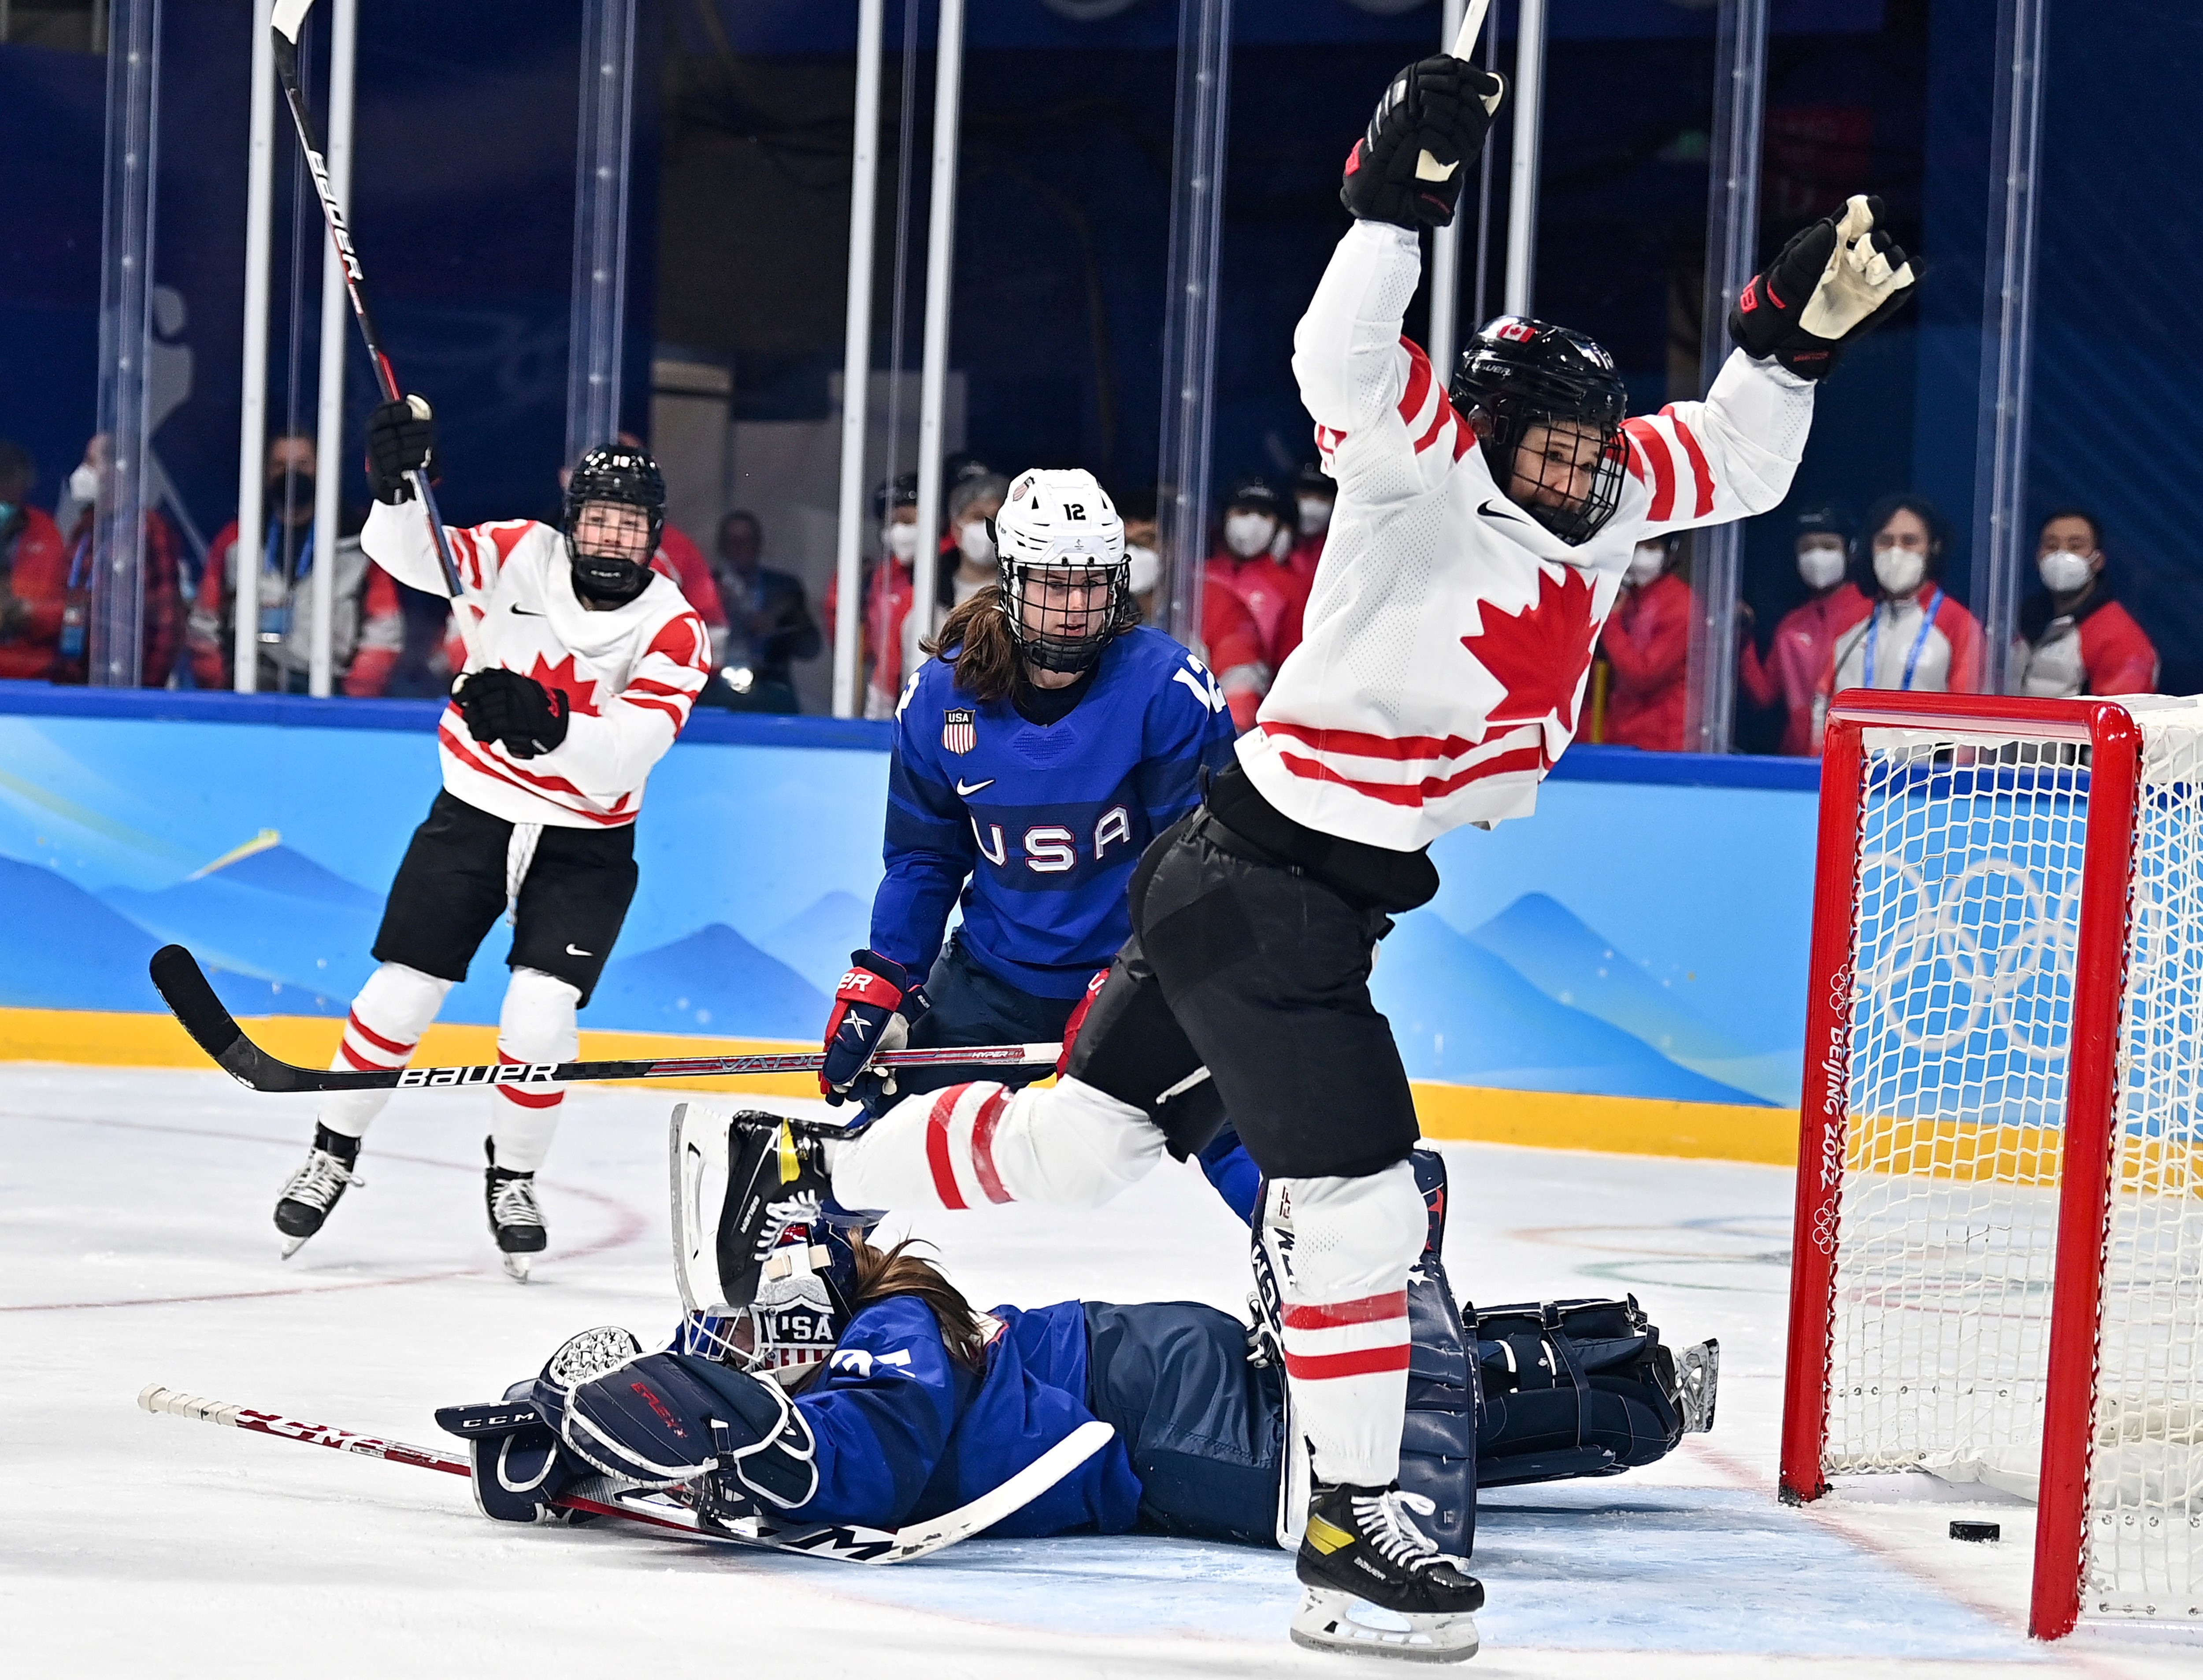 Jamie Lee Rattray 1st R of Canada scores during the ice hockey women’s preliminary round group A match between Canada and the United States at Wukesong Sports Centre in Beijing, capital of China, Feb. 8, 2022.